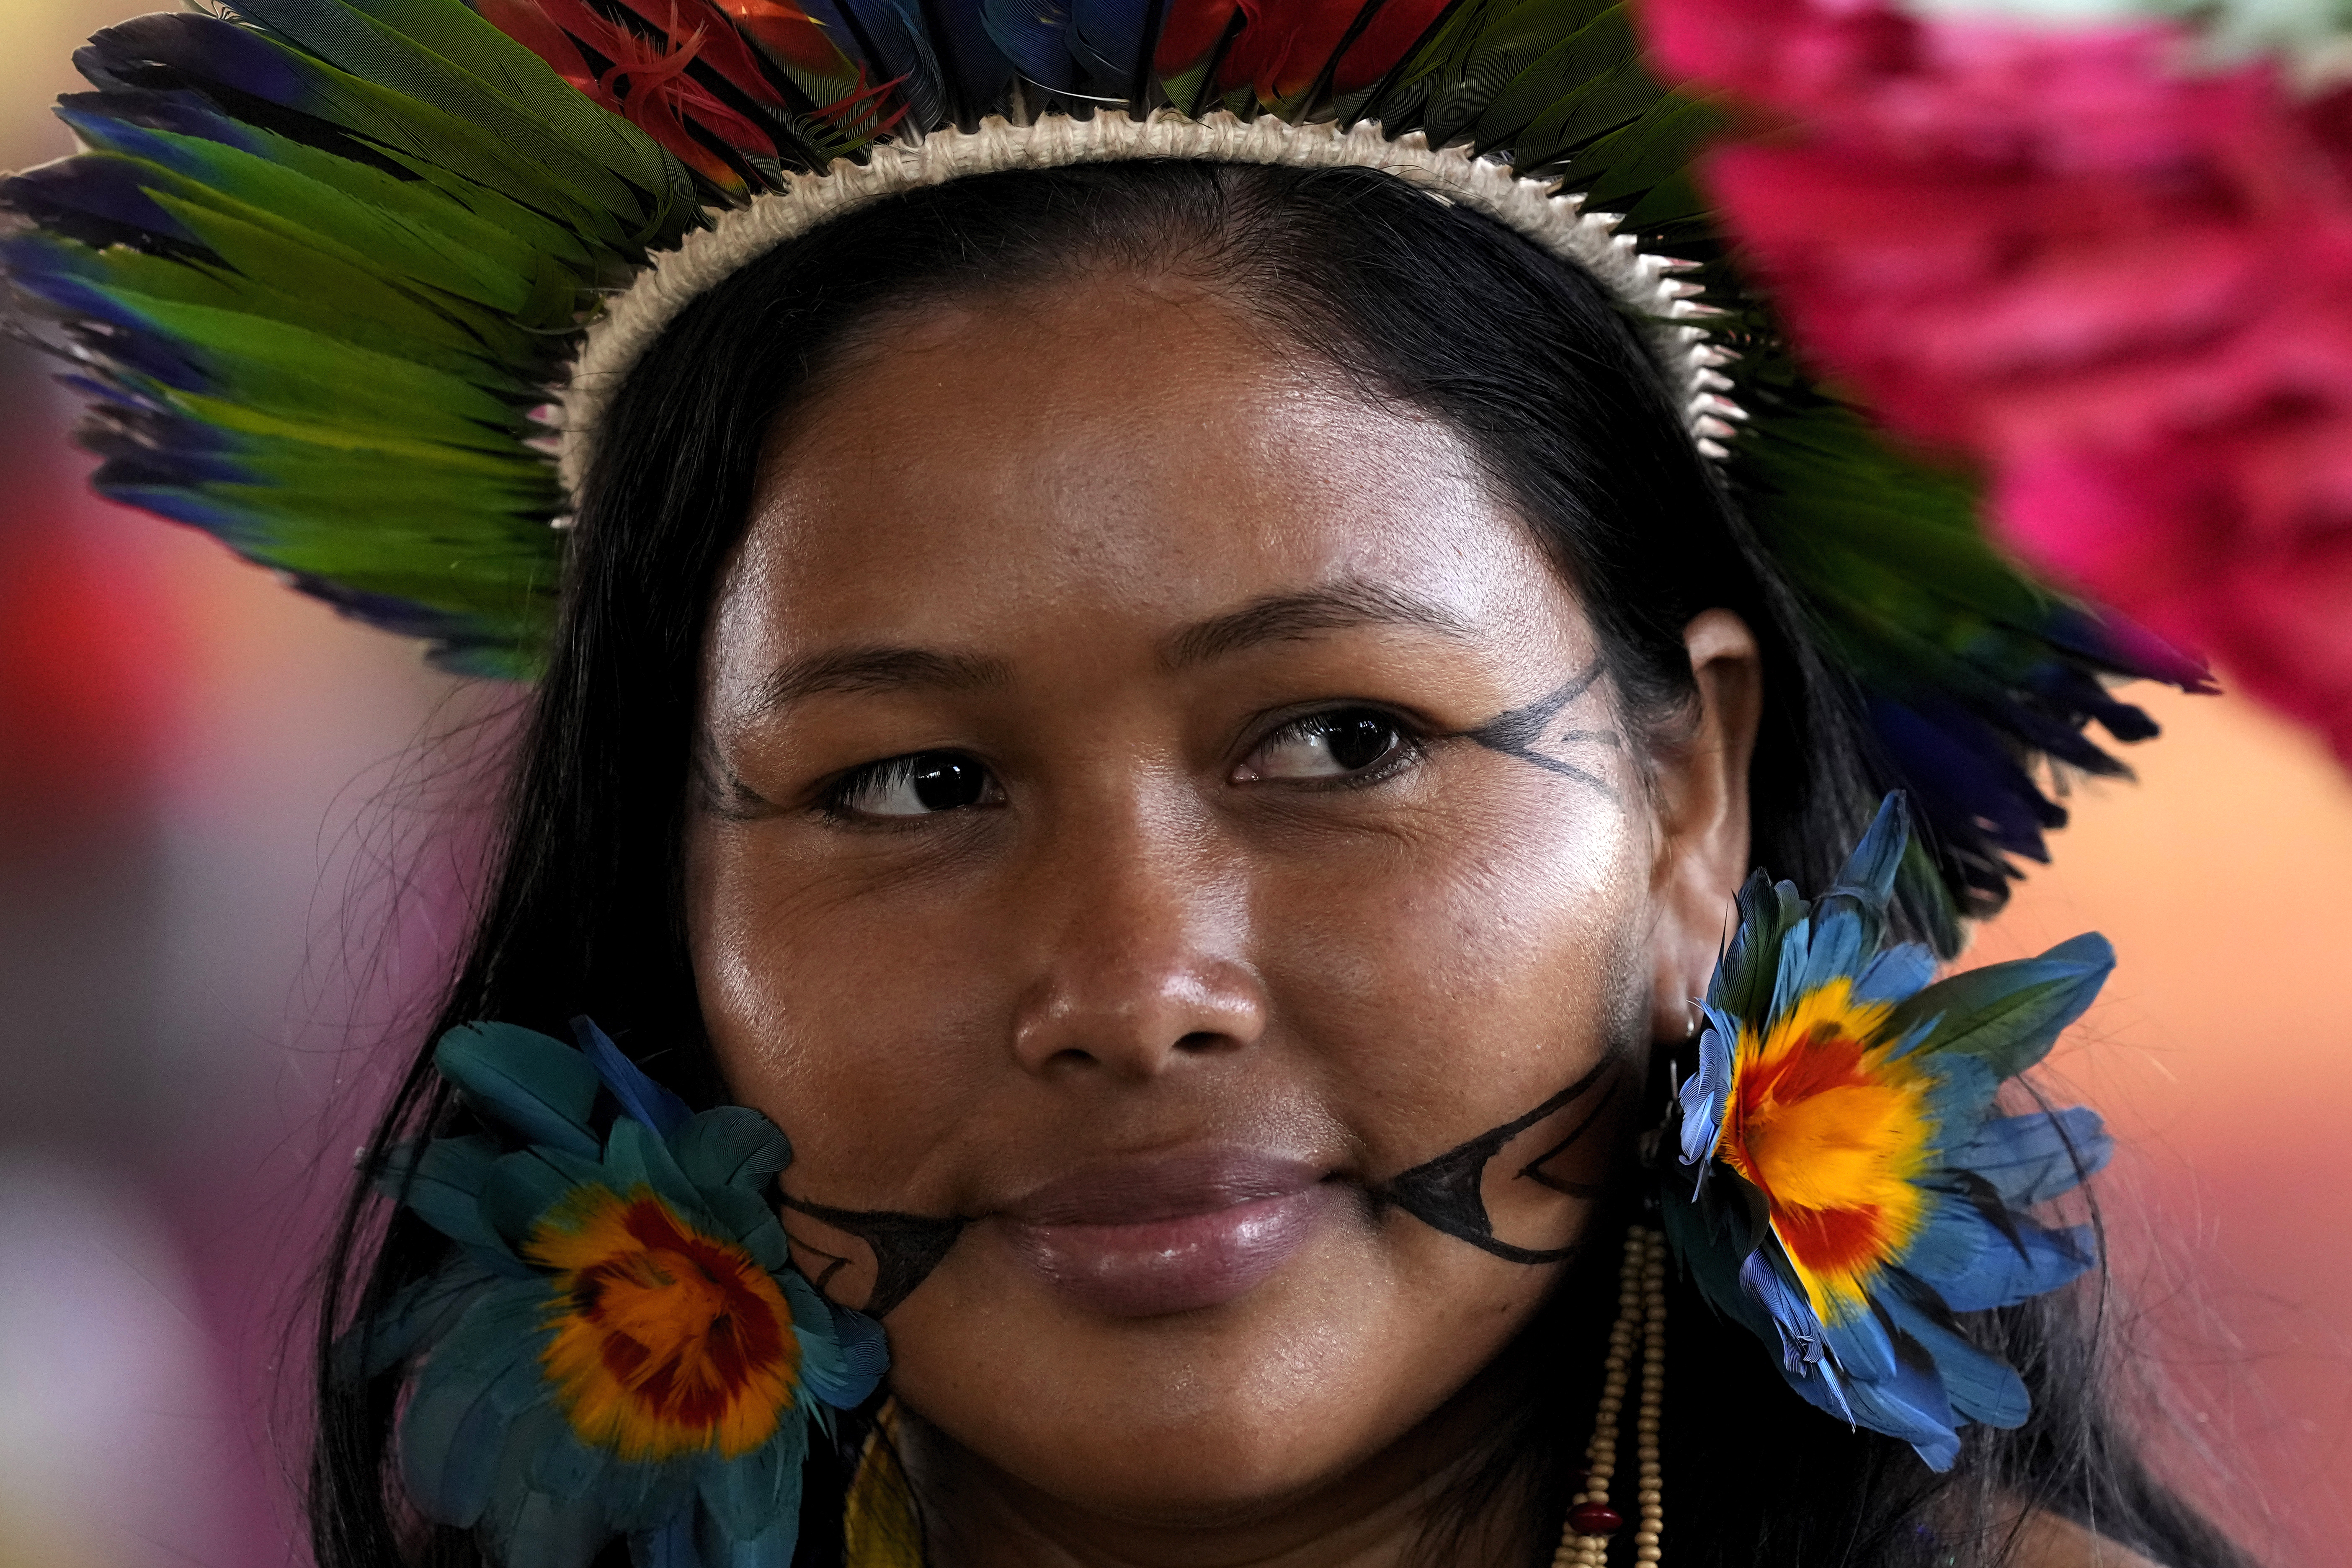 An indigenous woman attends the closing ceremony of the annual Terra Livre camp in Brasilia, Brazil, on April 28, 2023. (AP Photo/Eraldo Peres)